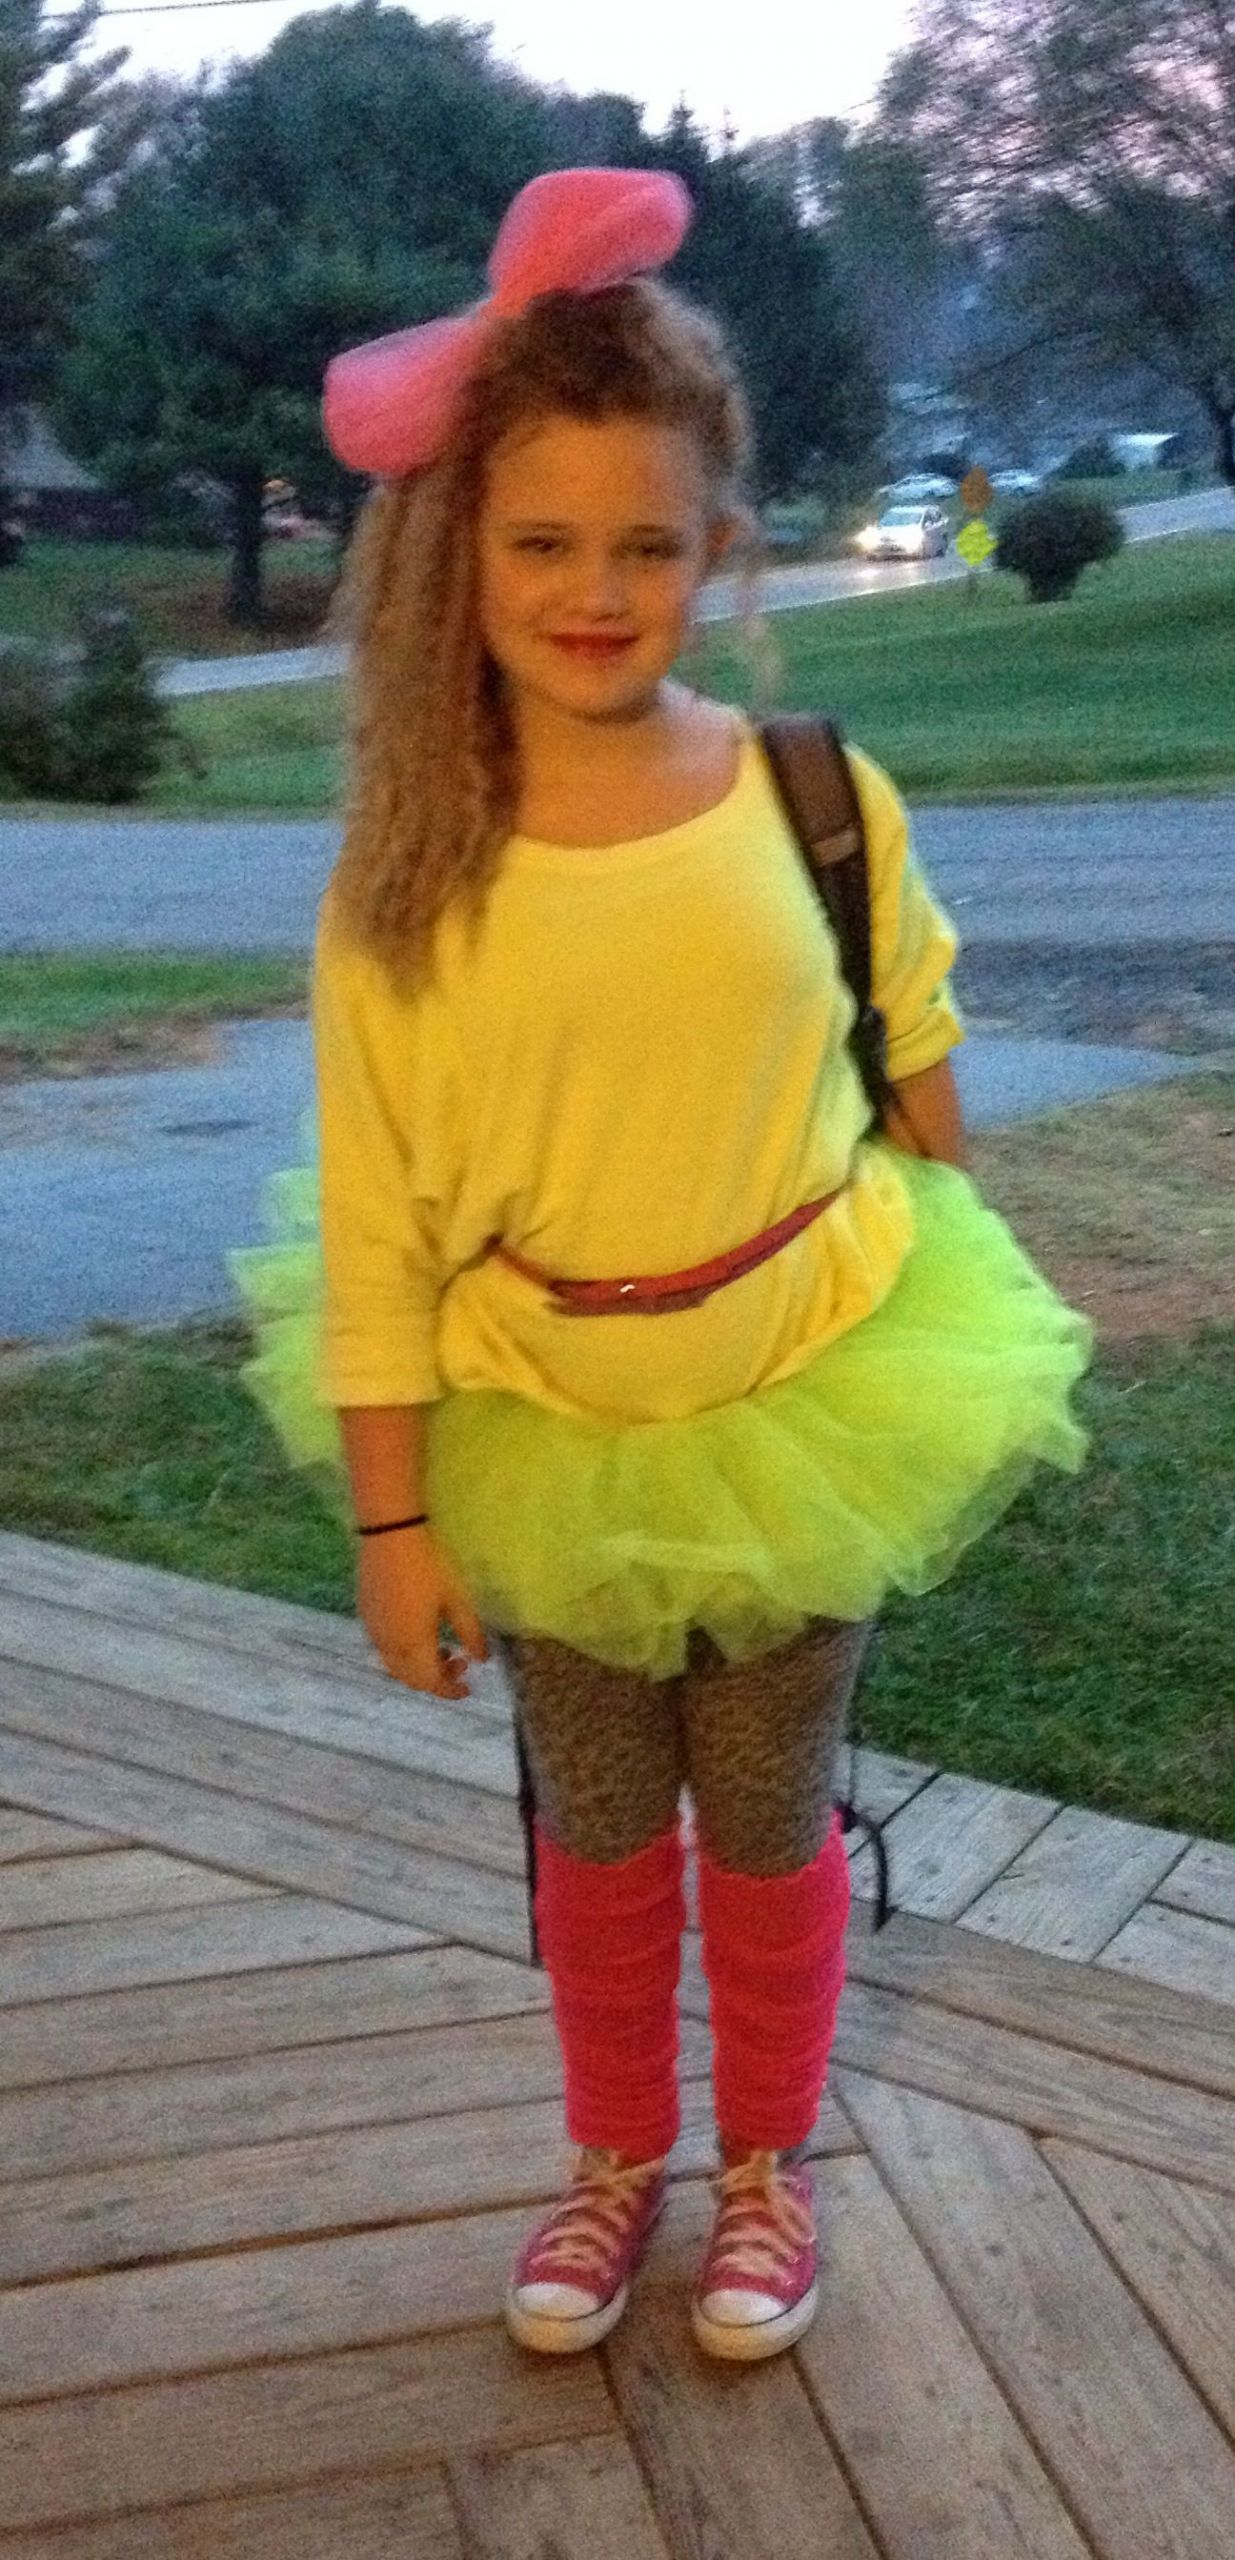 80S Dress Up Ideas For Kids
 80s Halloween Costume LOVE THE HAIR AND BIG BOW With